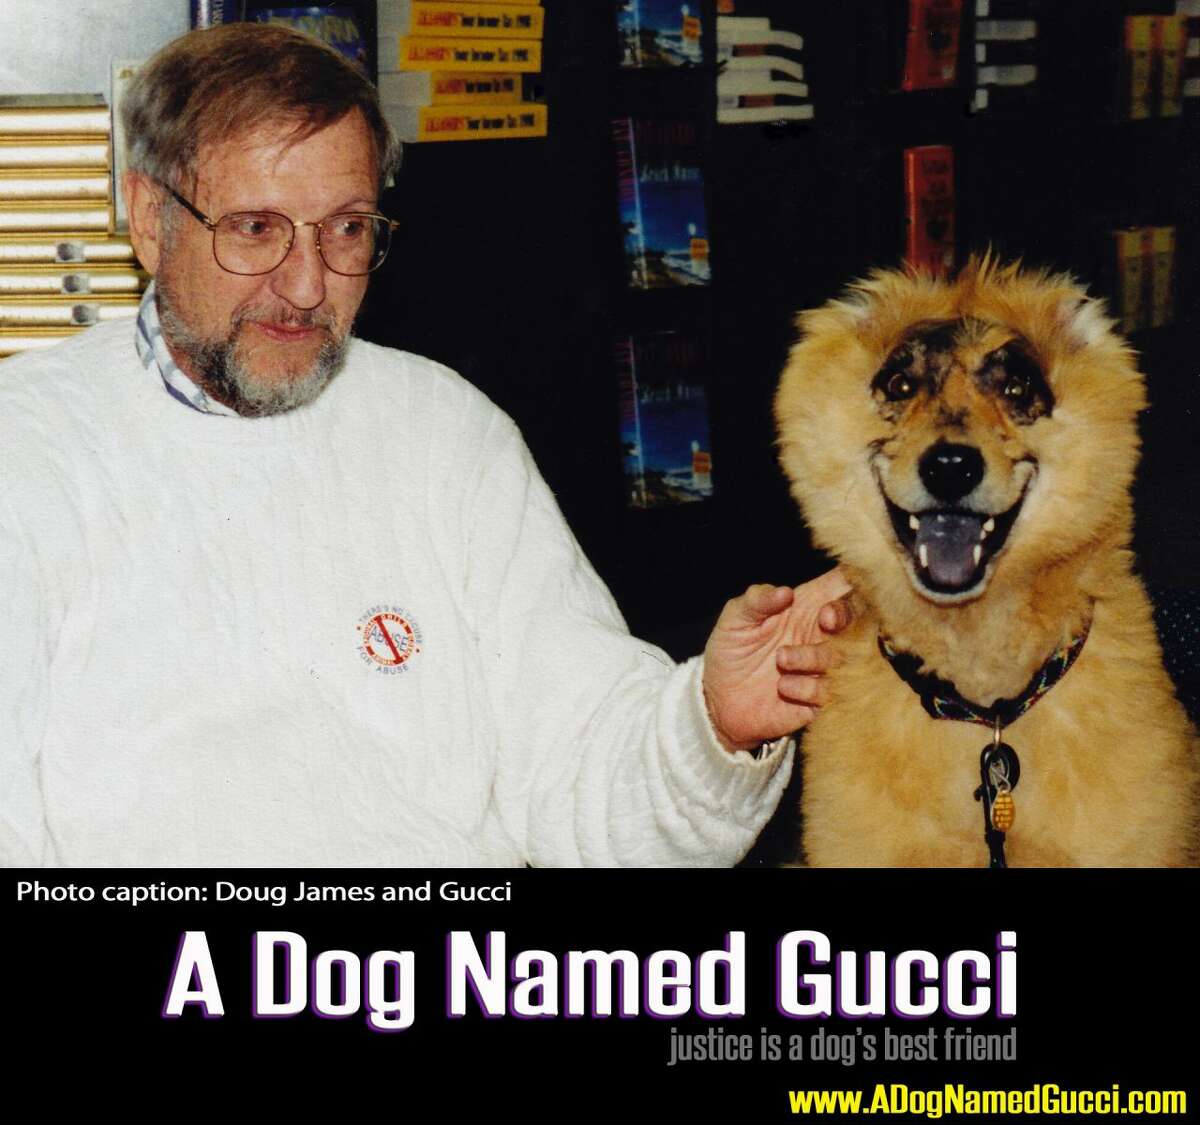 A Dog Named Gucci: Justice Is a Dog's Best Friend